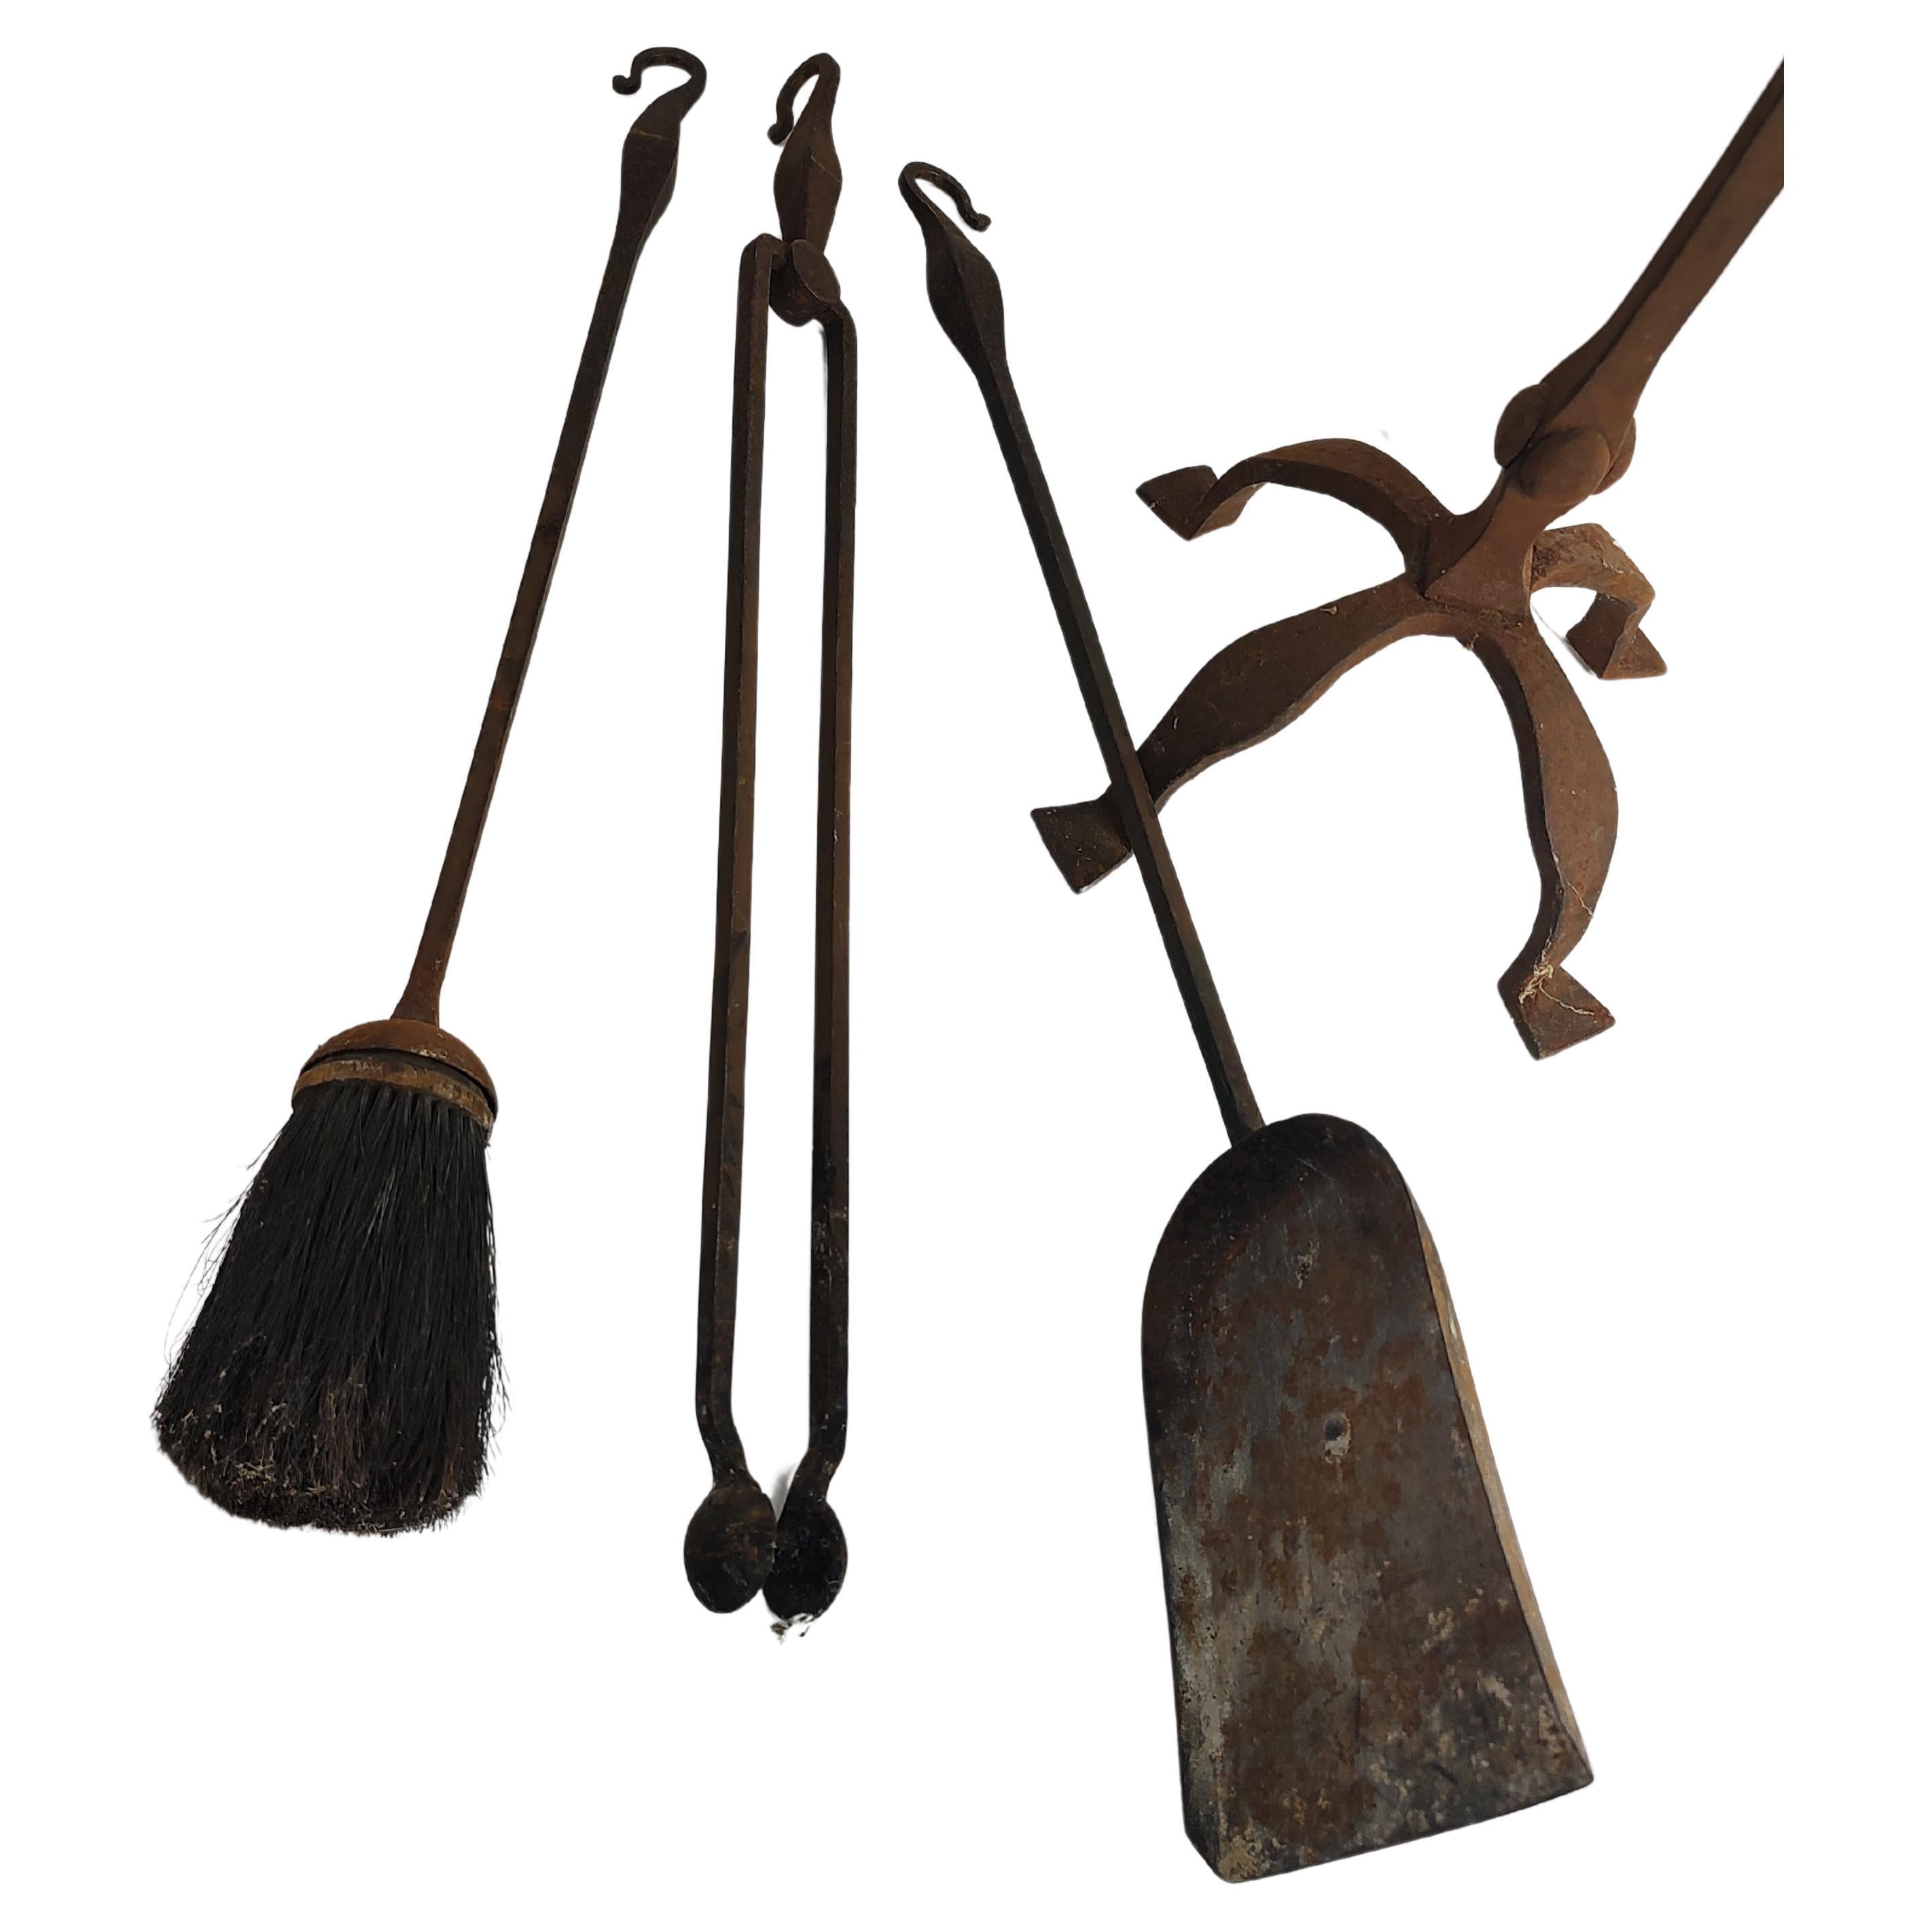 Aesthetic Movement 19th Century Hand Forged Iron Fireplace Tools 4 Piece Set For Sale